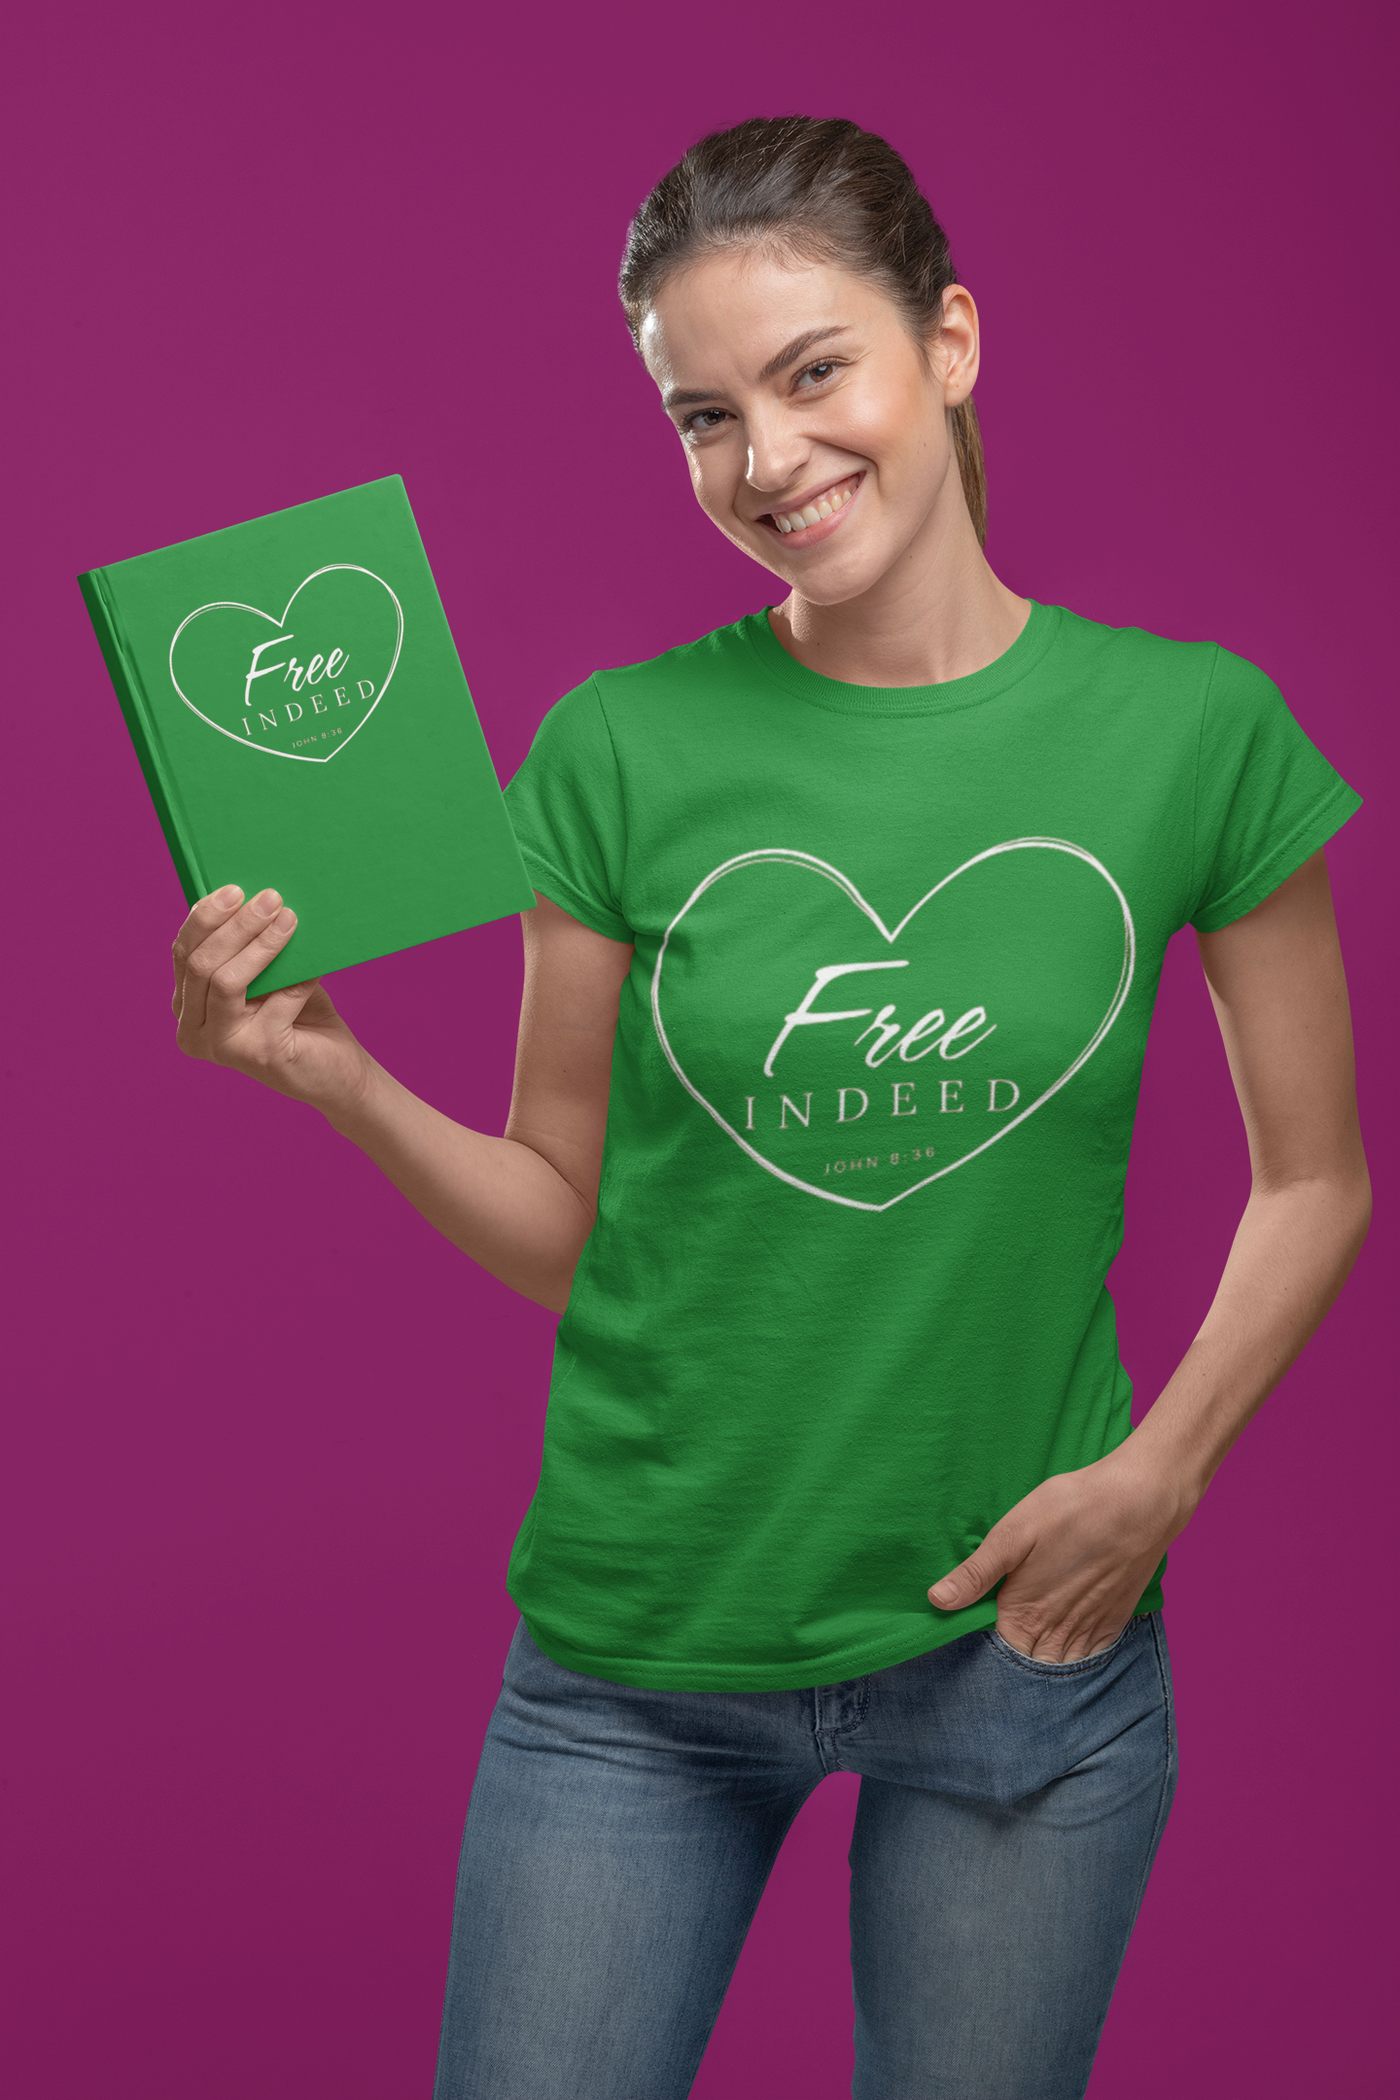 F and H Christian Your Heart is Free Indeed Womens T Shirt